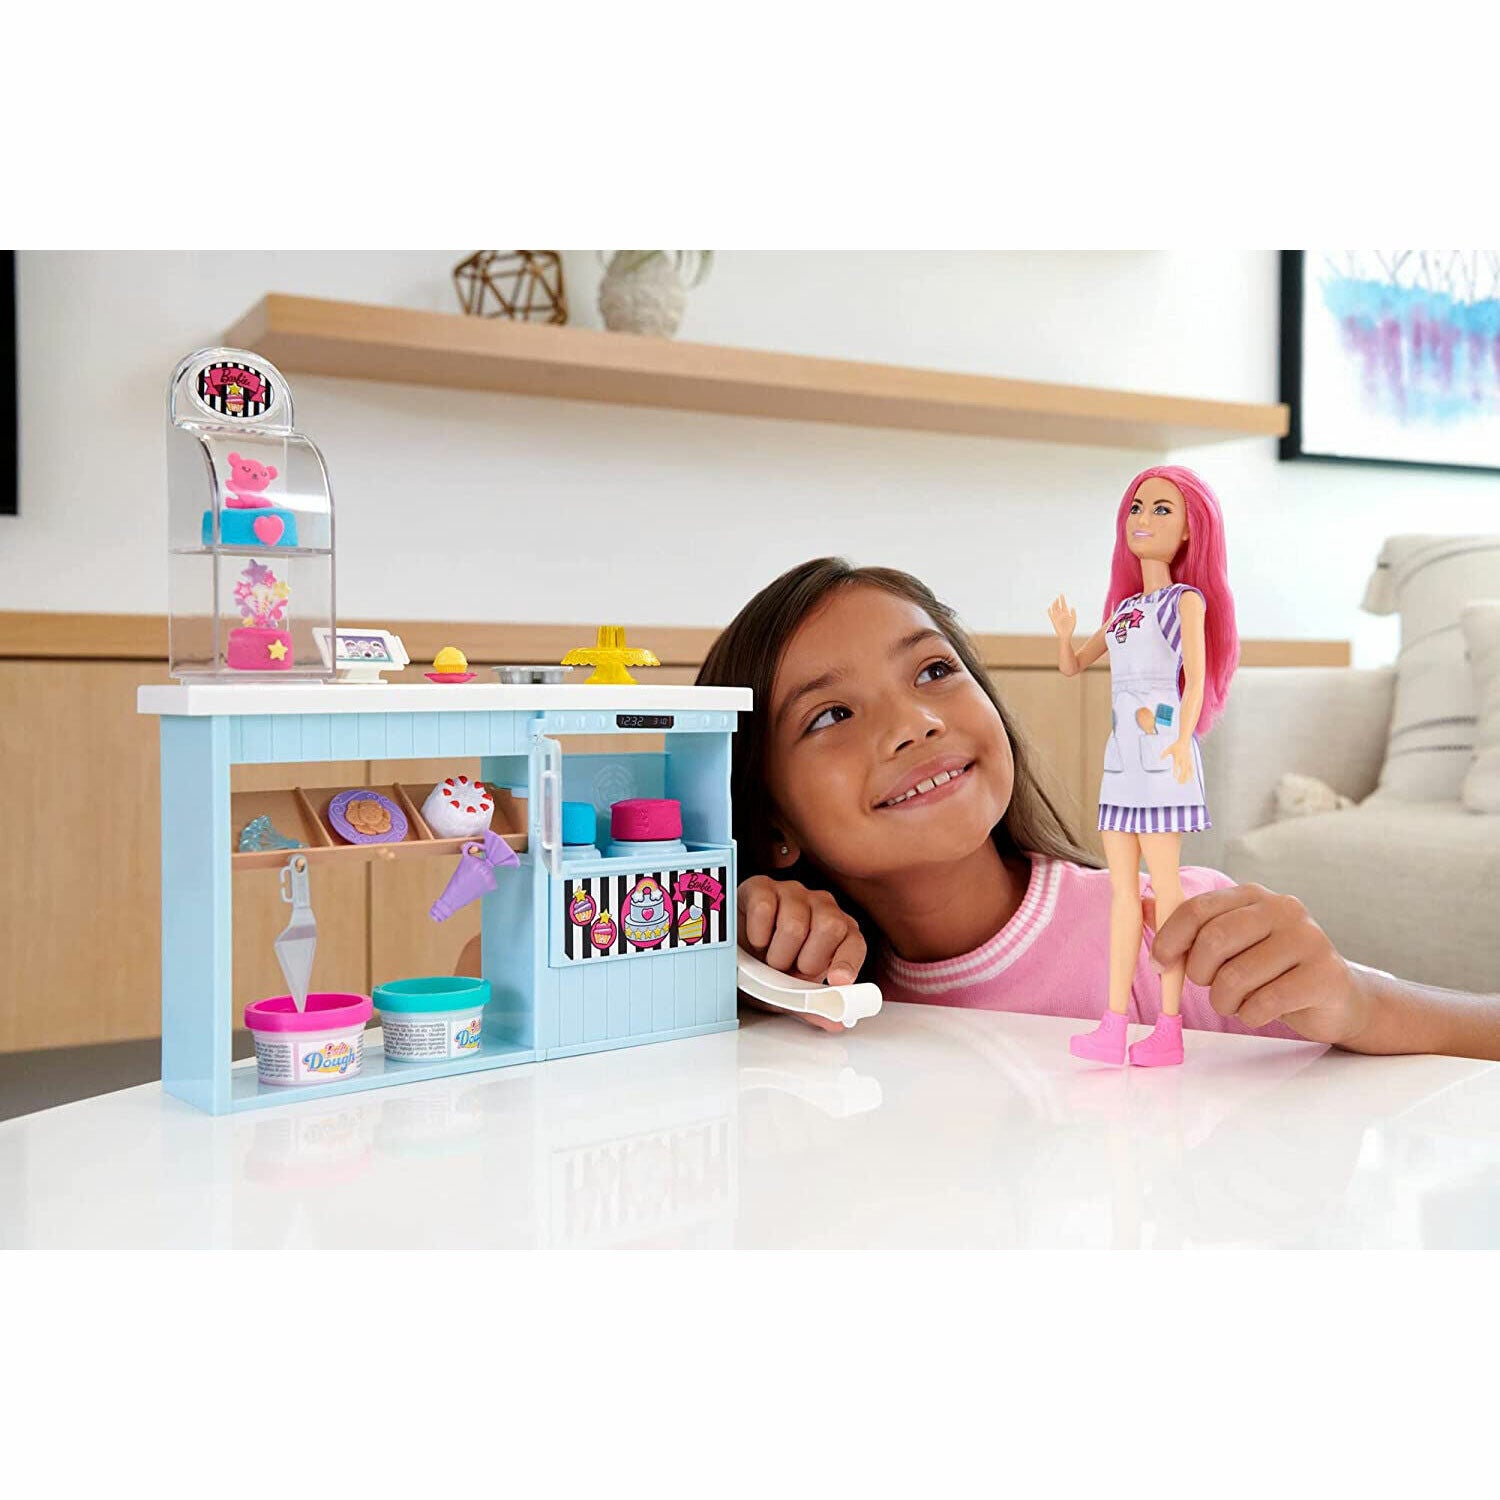 New Barbie Bakery Playset - Hours of Fun for Kids!